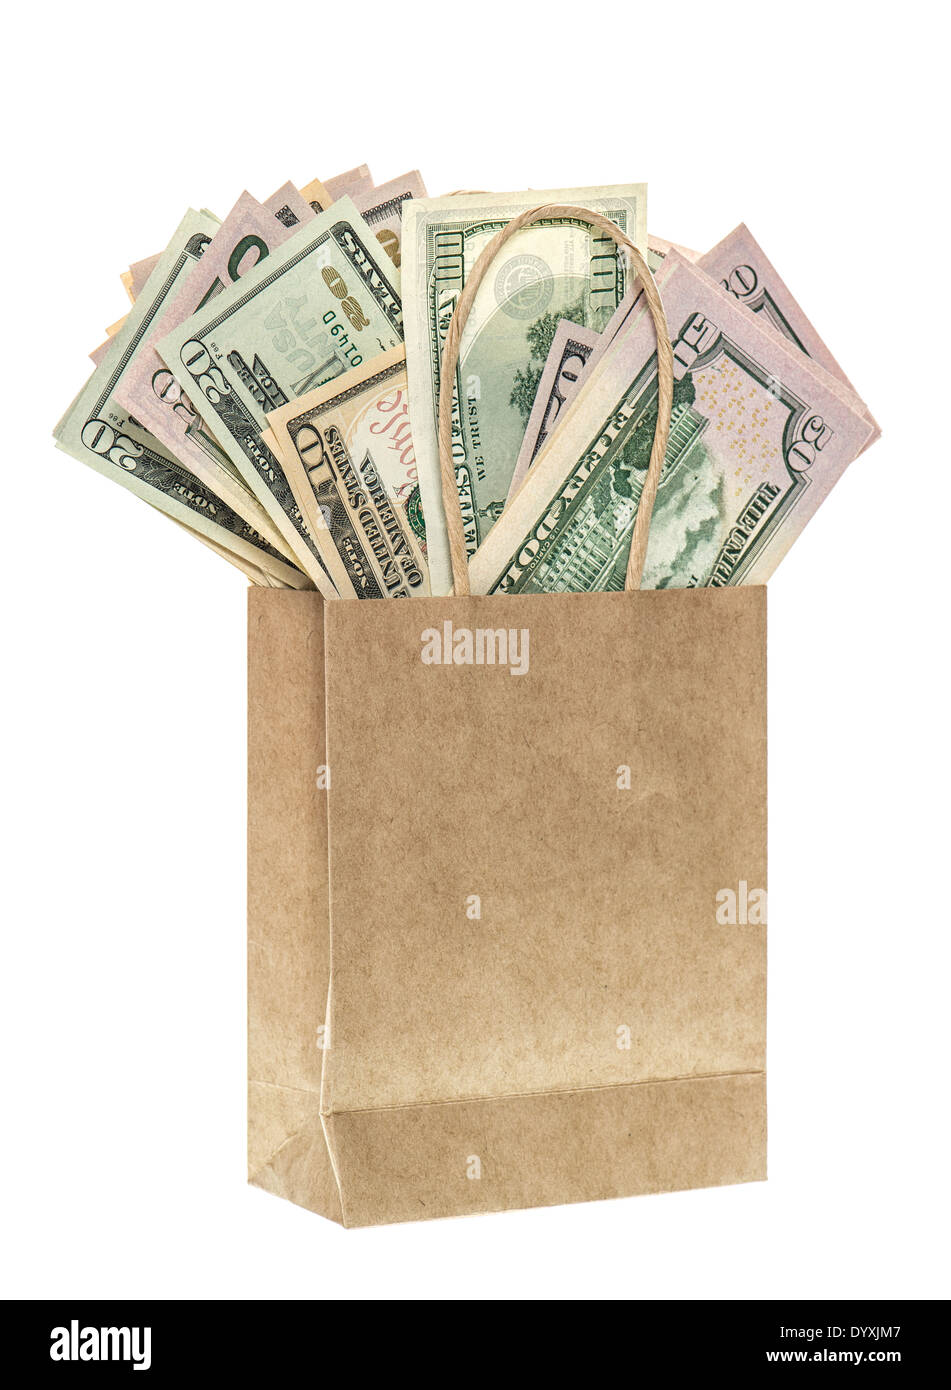 paper bag with american dollars isolated on white background. shopping concept Stock Photo